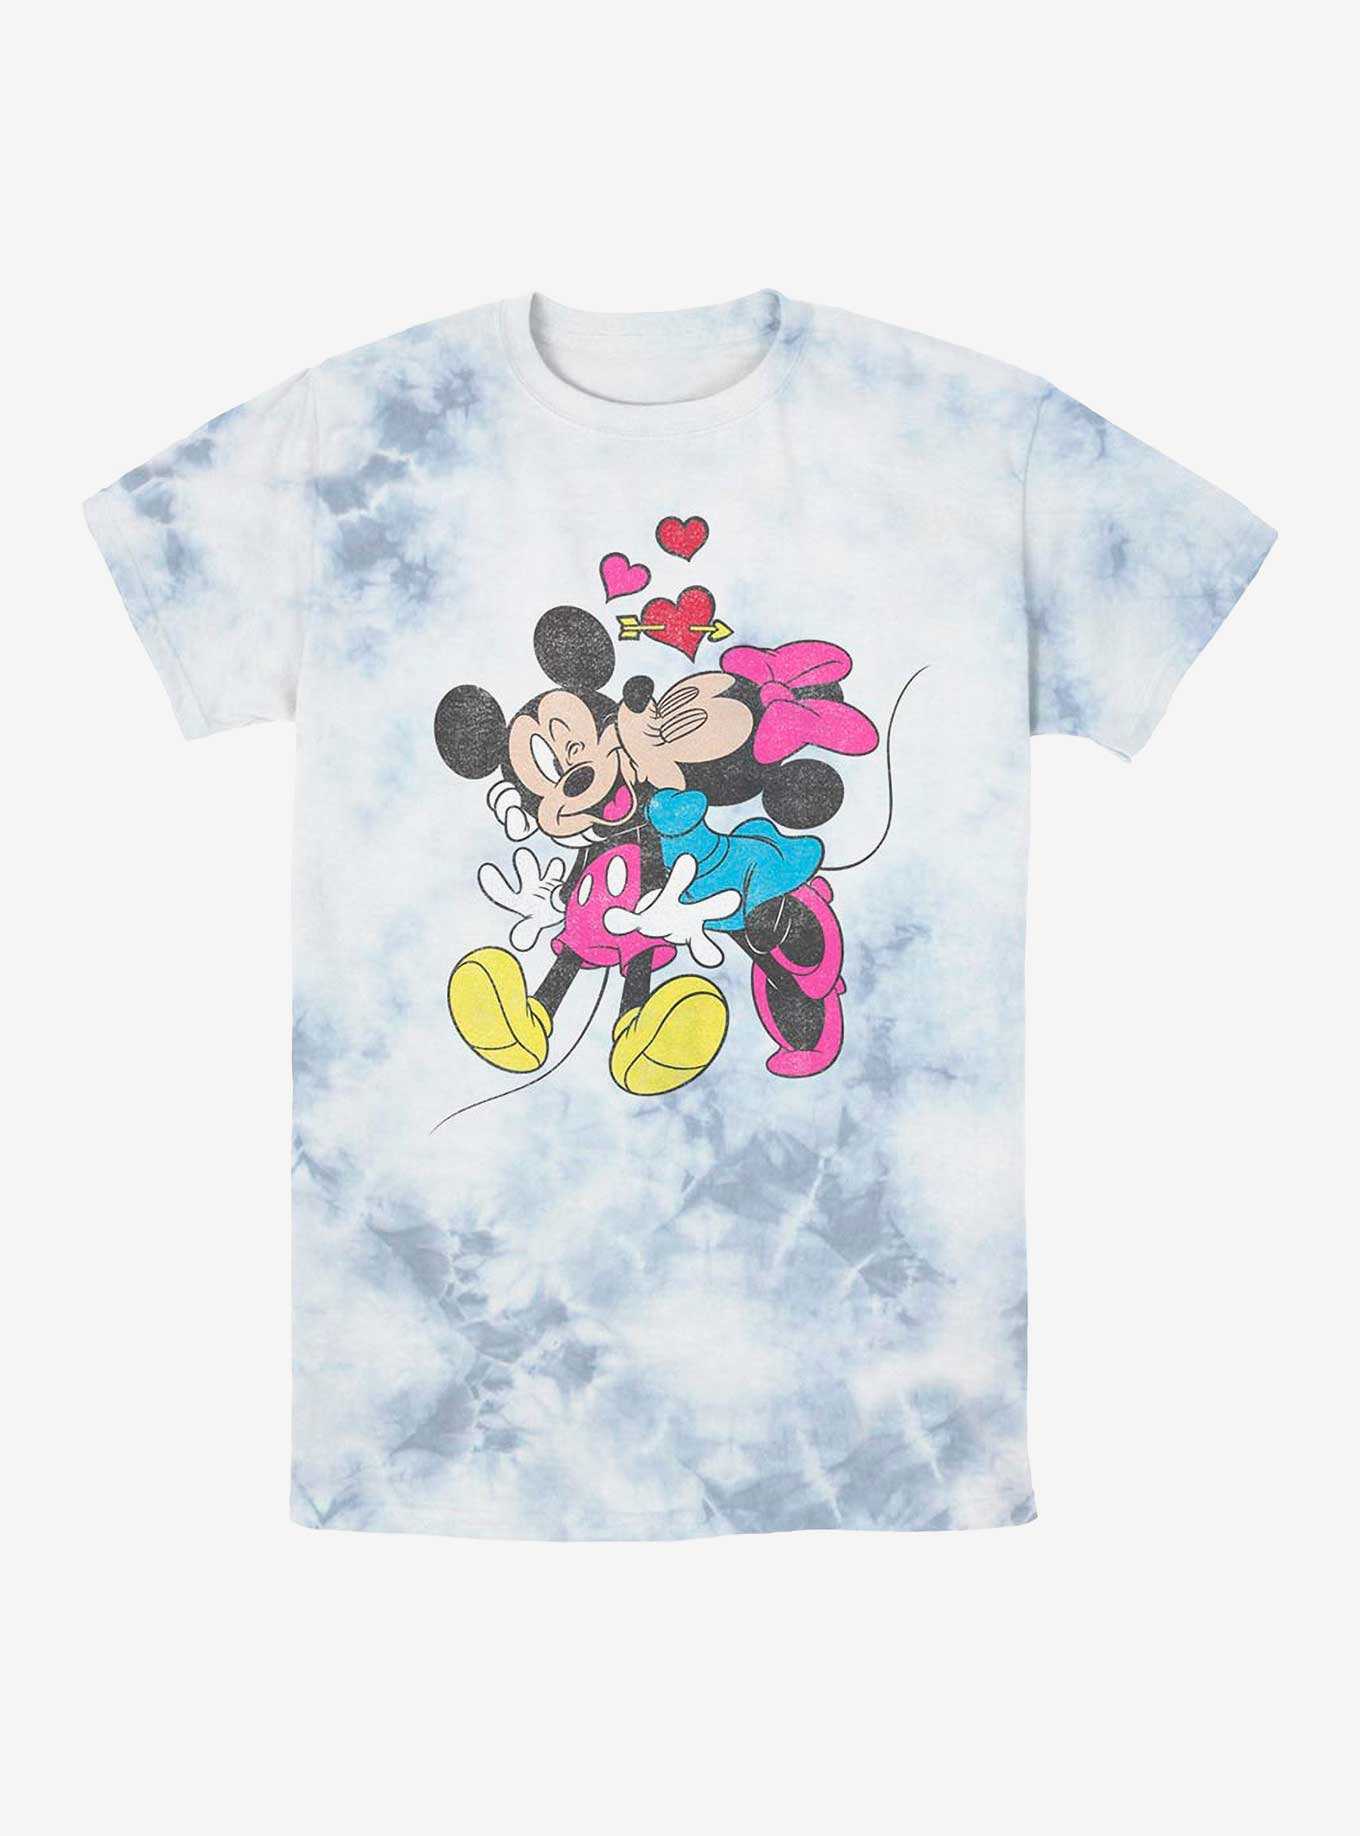 Disney Mickey Mouse & Minnie Mouse Love Tie-Dye T-Shirt, , hi-res